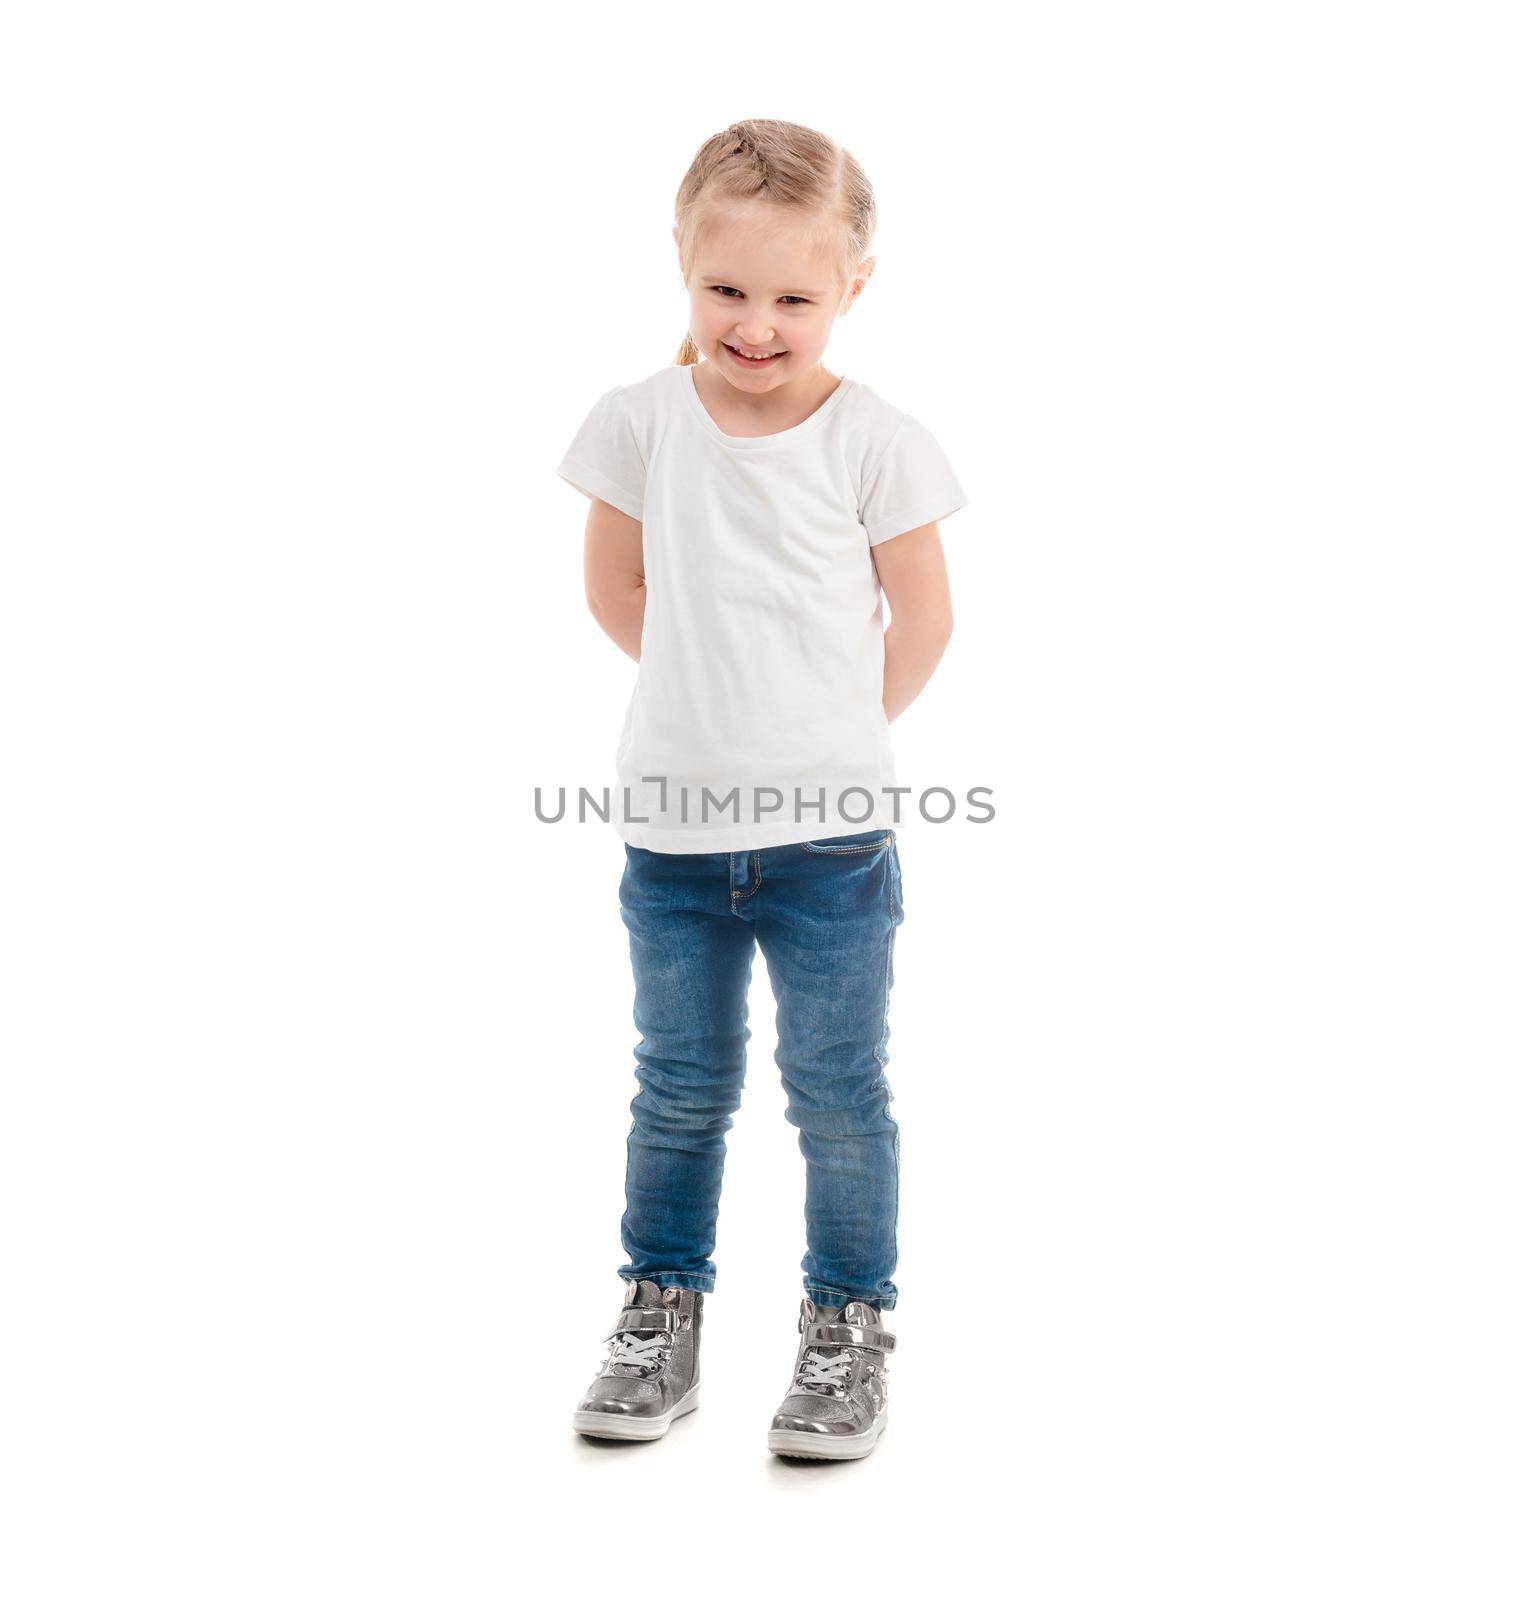 Adorable girl in a white t-shirt standing isolated on white background, lovely hairstyle